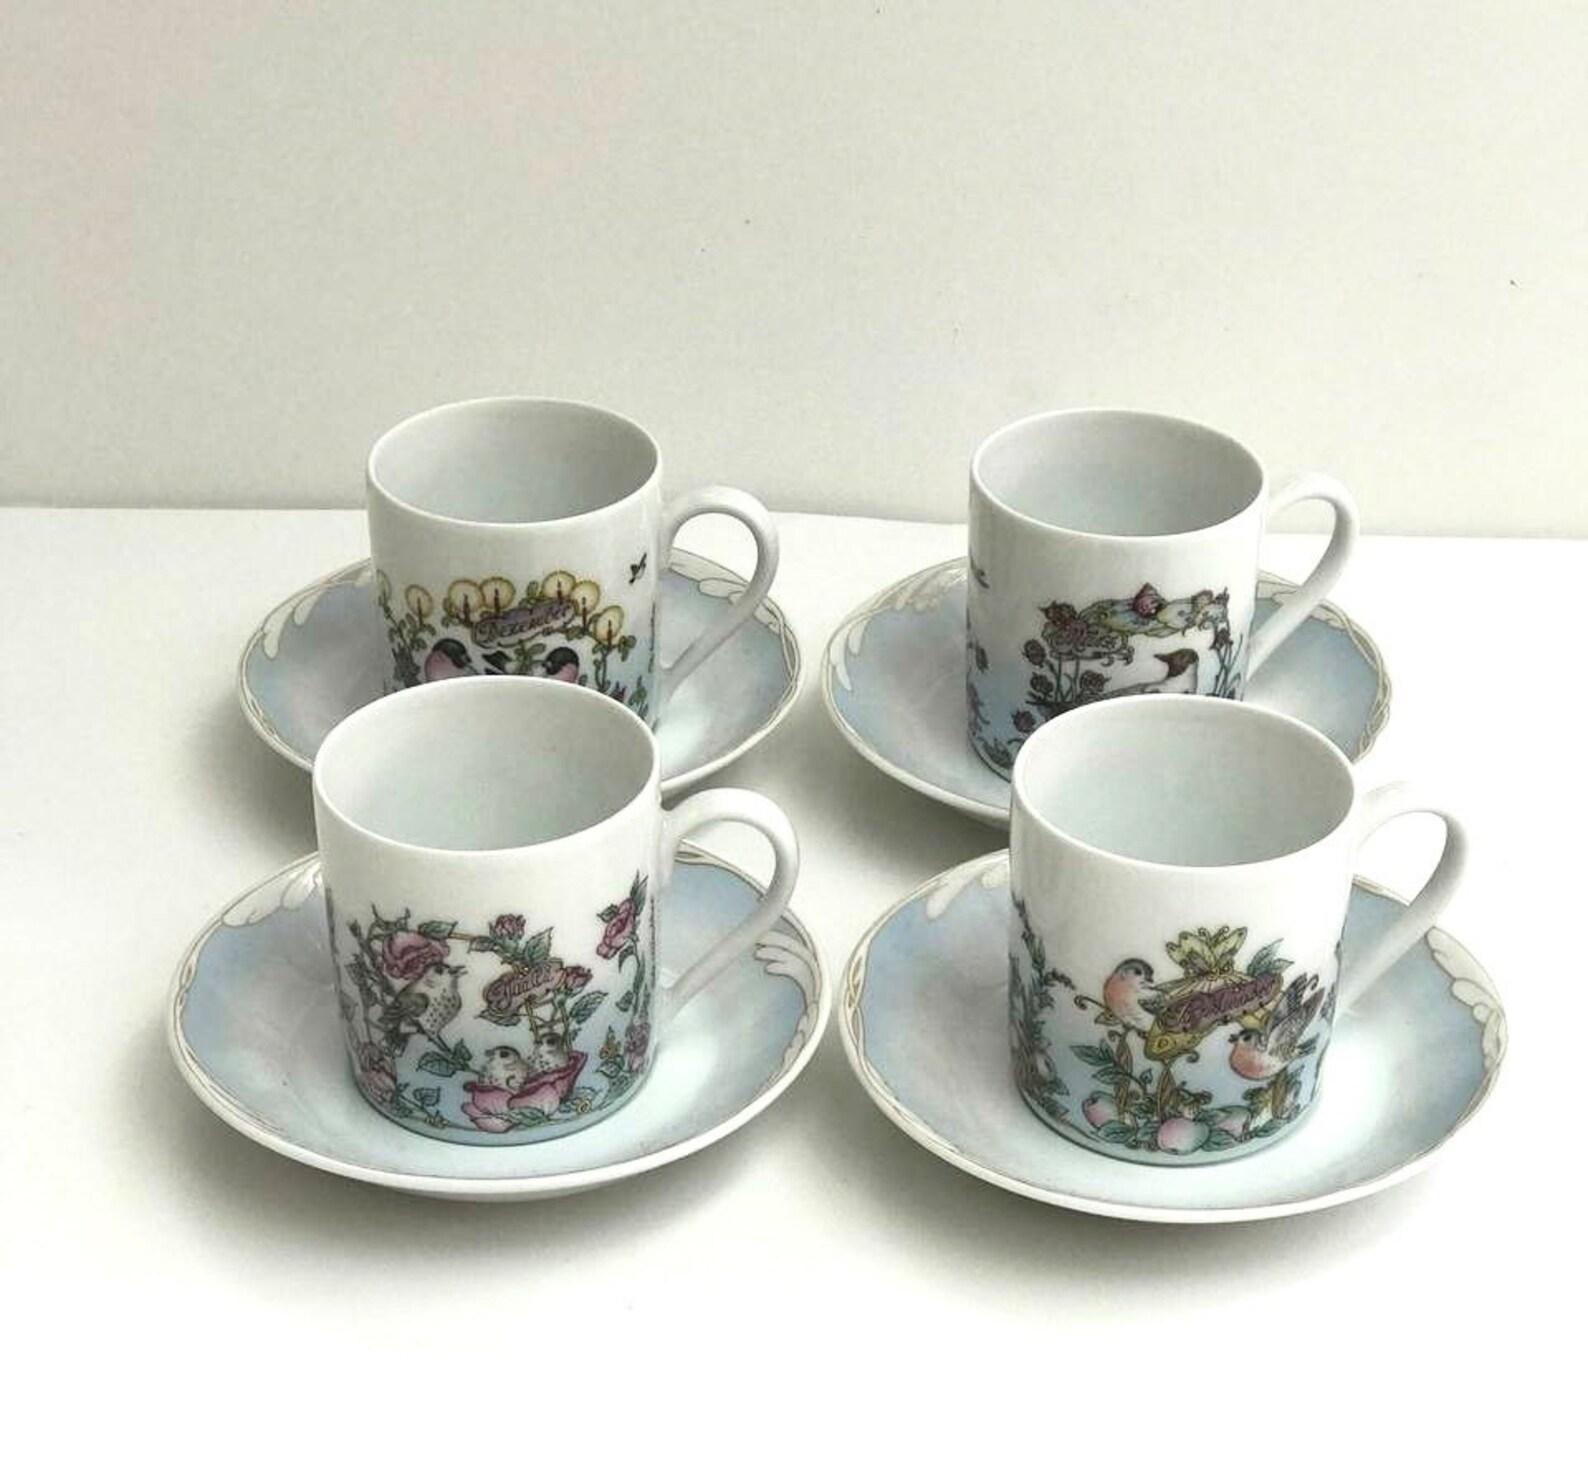 Vintage coffee set of 4. 

HUTSCHENREUTHER Germany Coffee Cups and Saucers.

The price is for all Set (4 Cups + 4 Saucer).

In excellent condition, no chips, cracks or crazing. 

Vintage.

Bone China Rare Coffee Cups and Saucers.

Volume